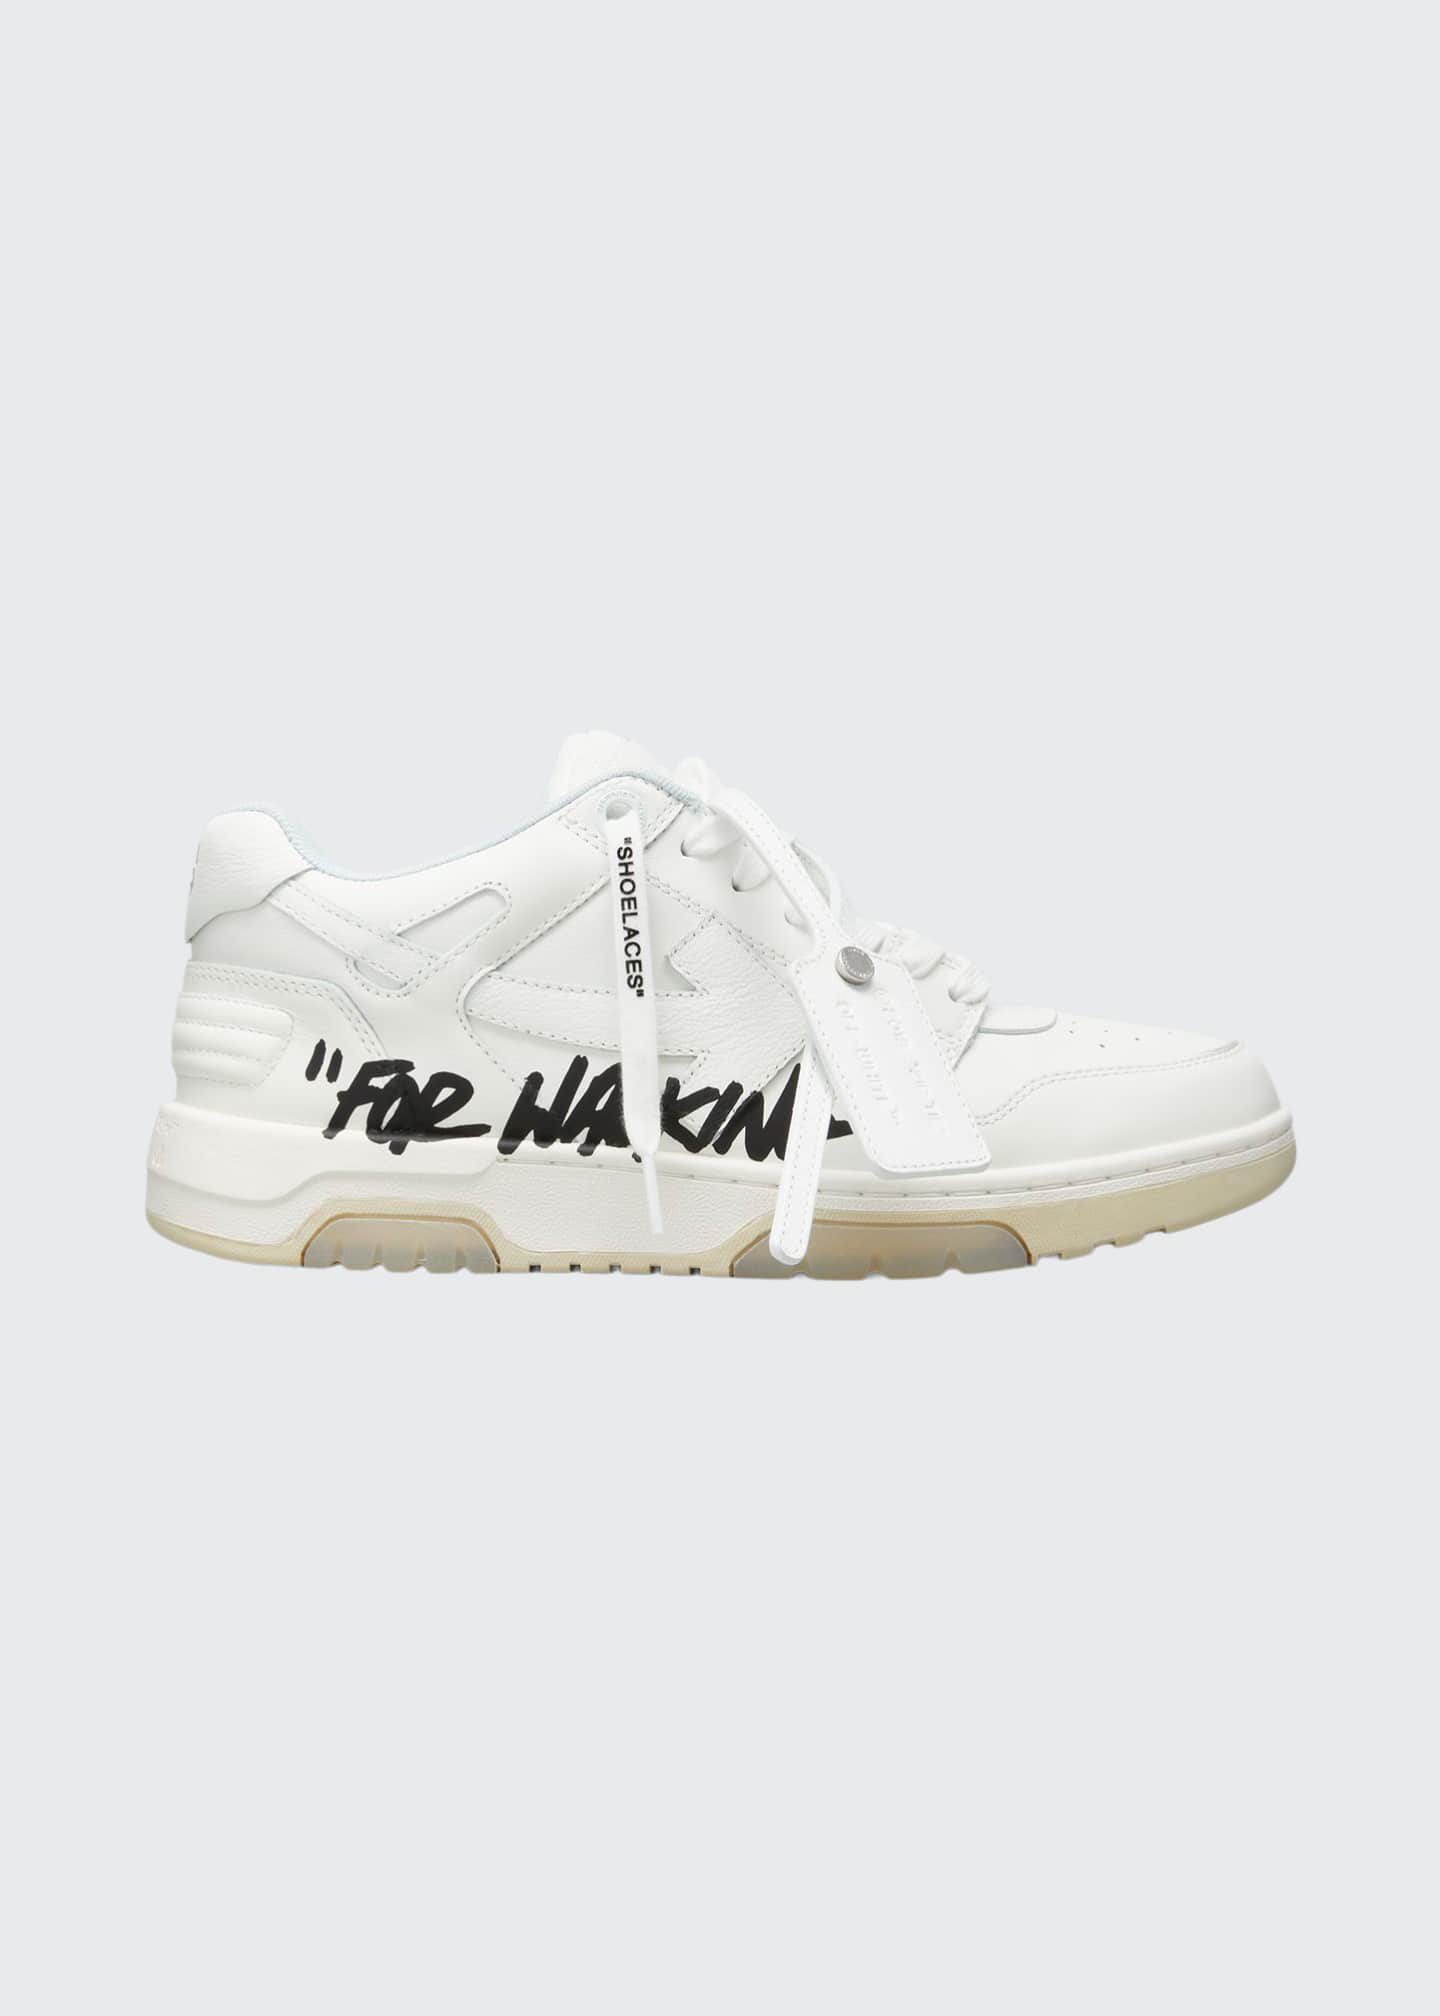 Off-White Men's Out of Office For Walking Trainer Sneakers - Bergdorf